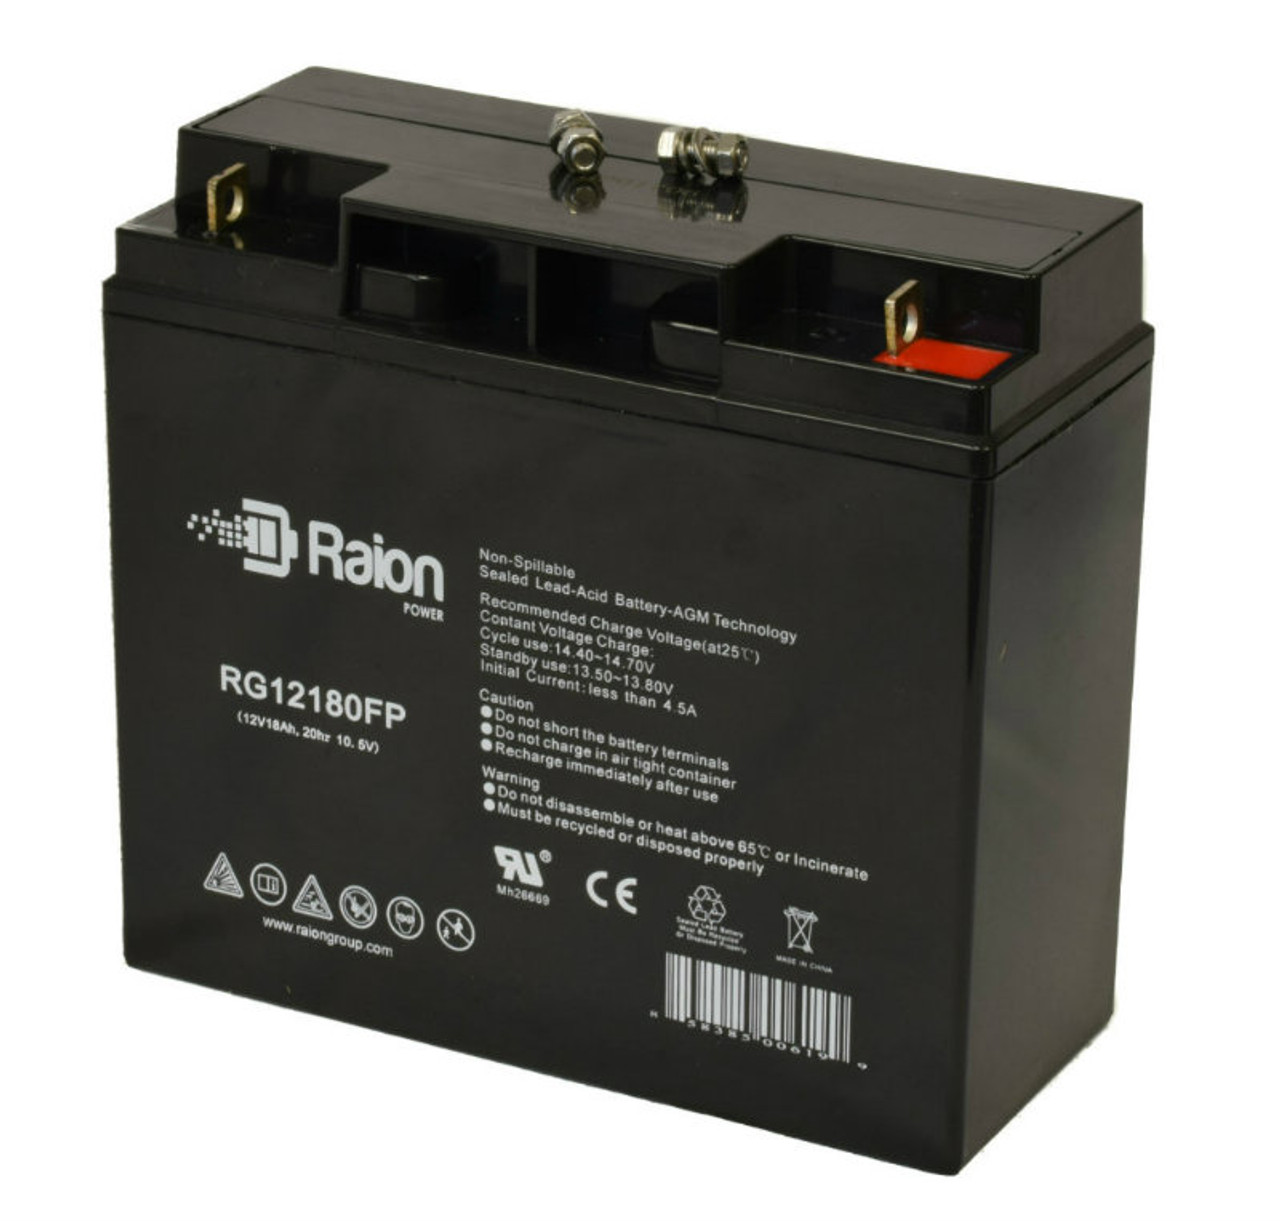 Raion Power Replacement 12V 18Ah Battery for Kaiying KS15-12A - 1 Pack